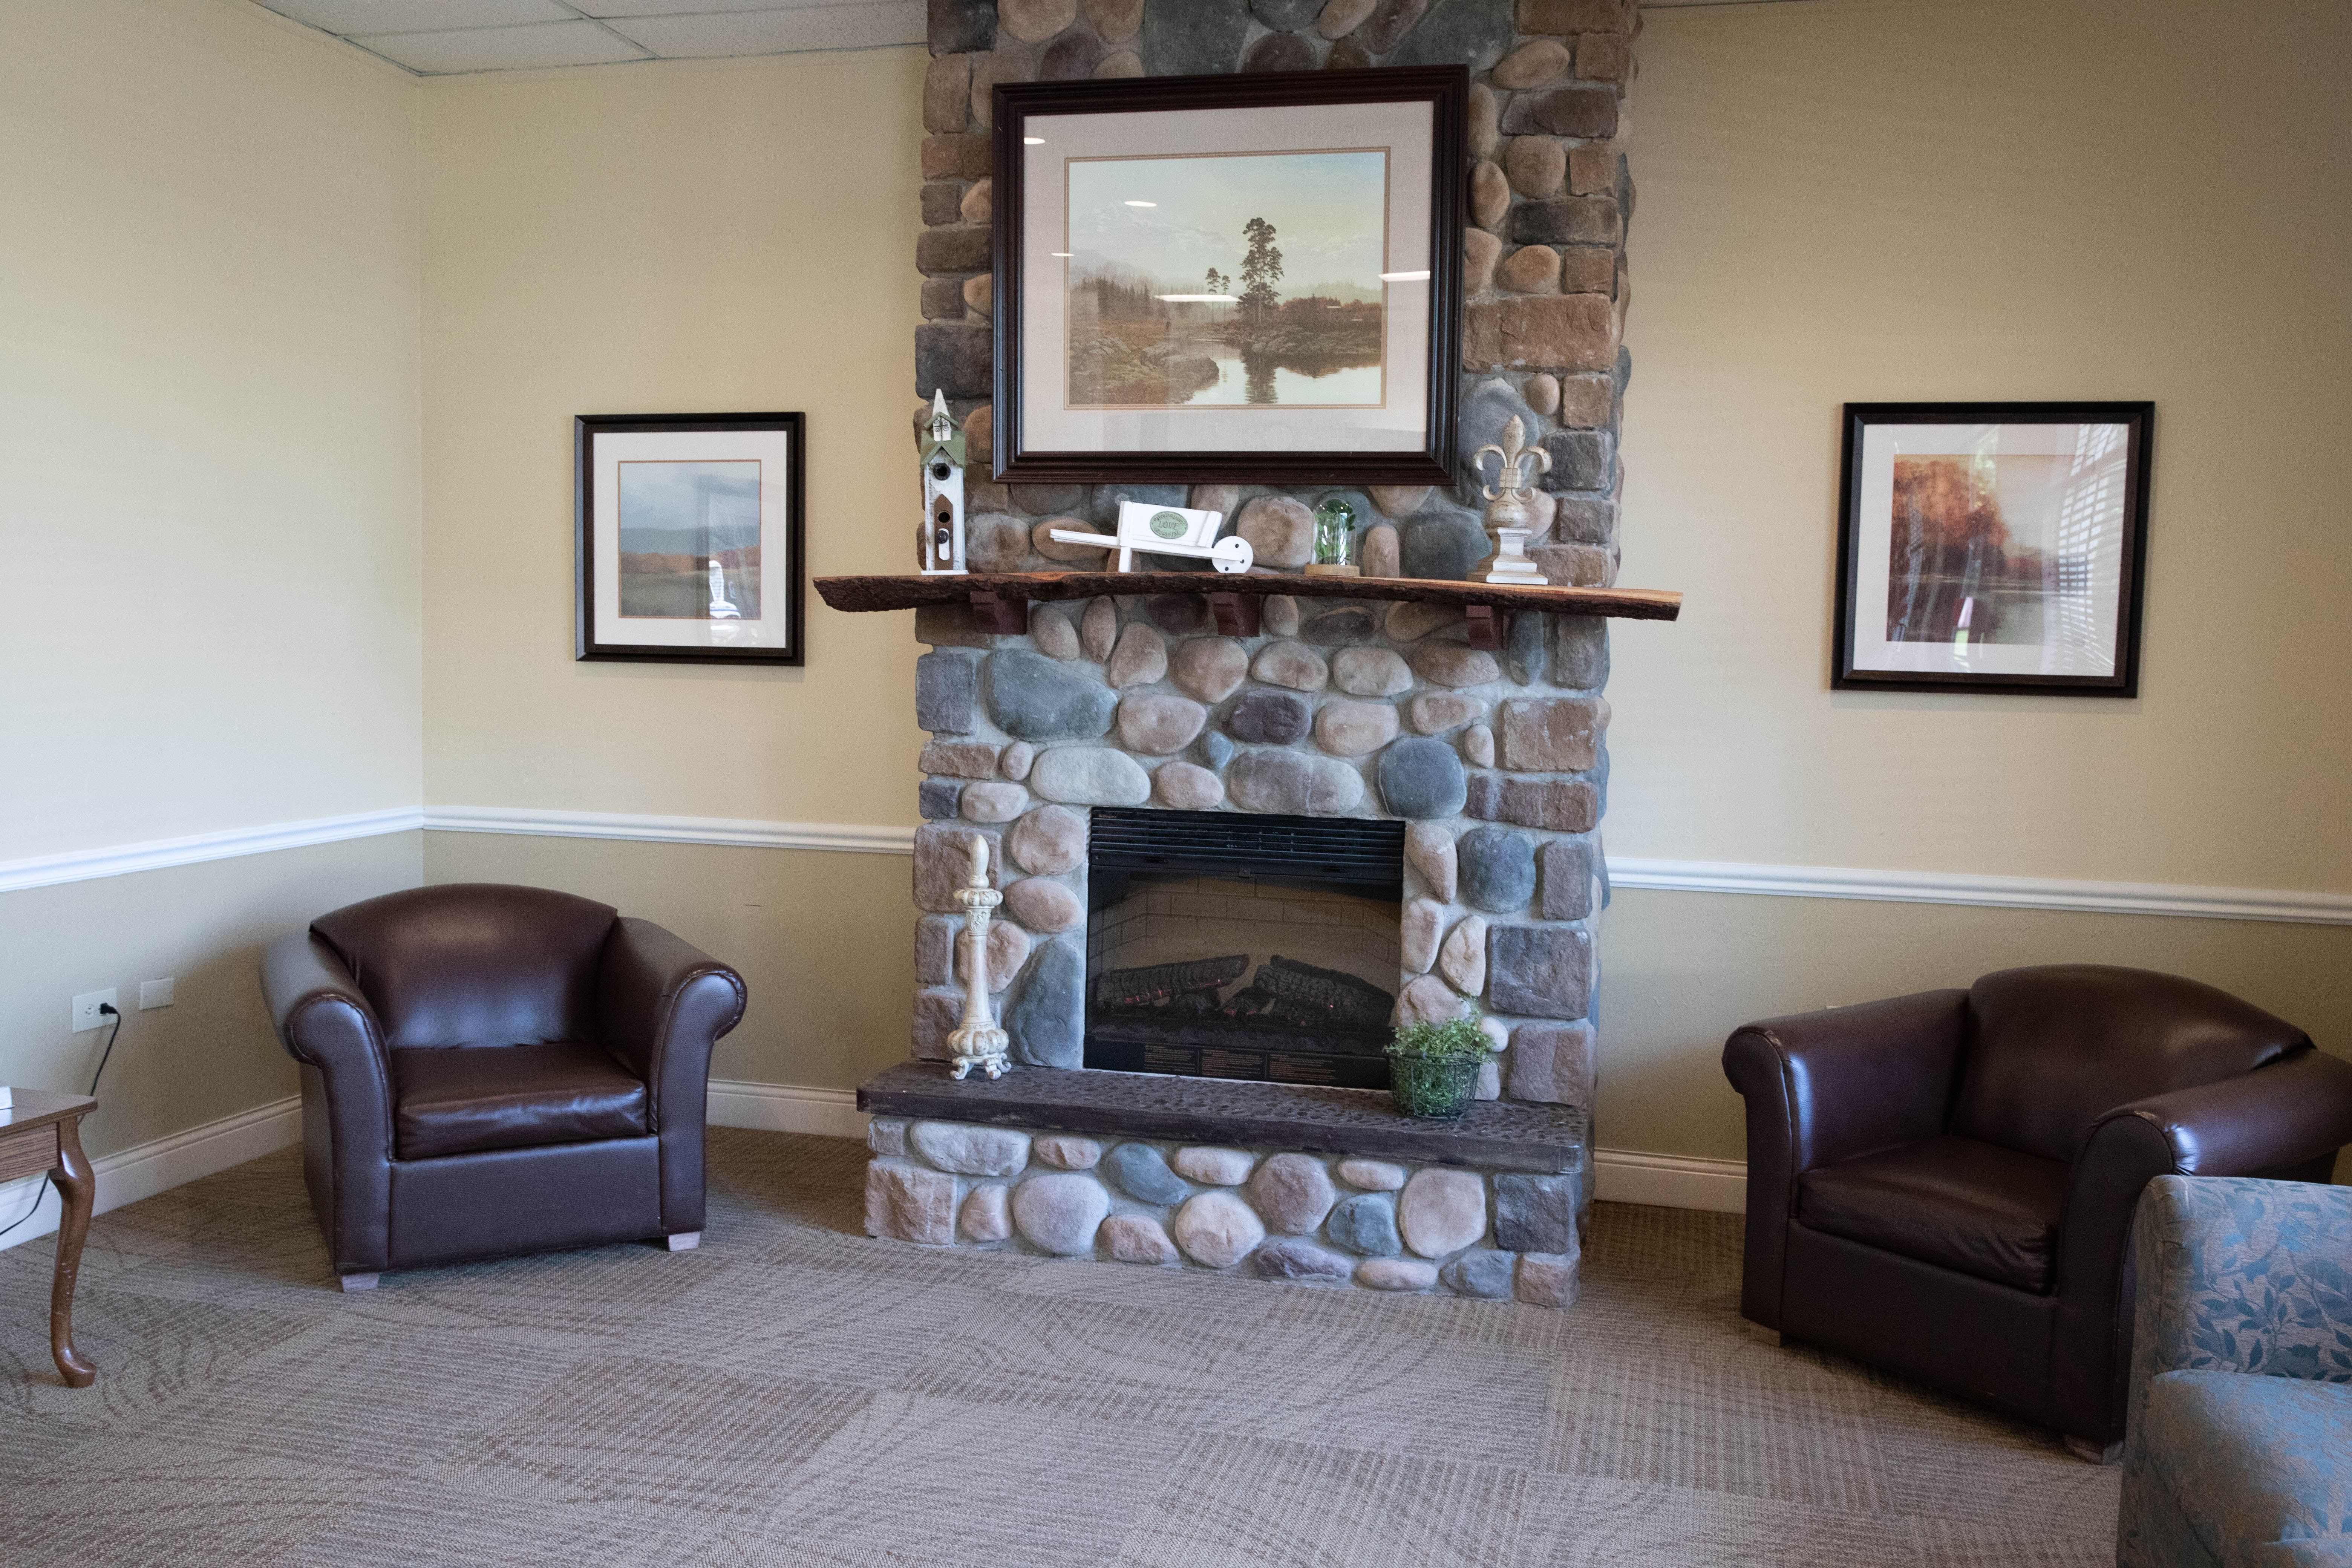 <span  class="uc_style_uc_tiles_grid_image_elementor_uc_items_attribute_title" style="color:#000000;">Interior of the lounge next to the fireplace at Williamsport Garden Homes. </span>